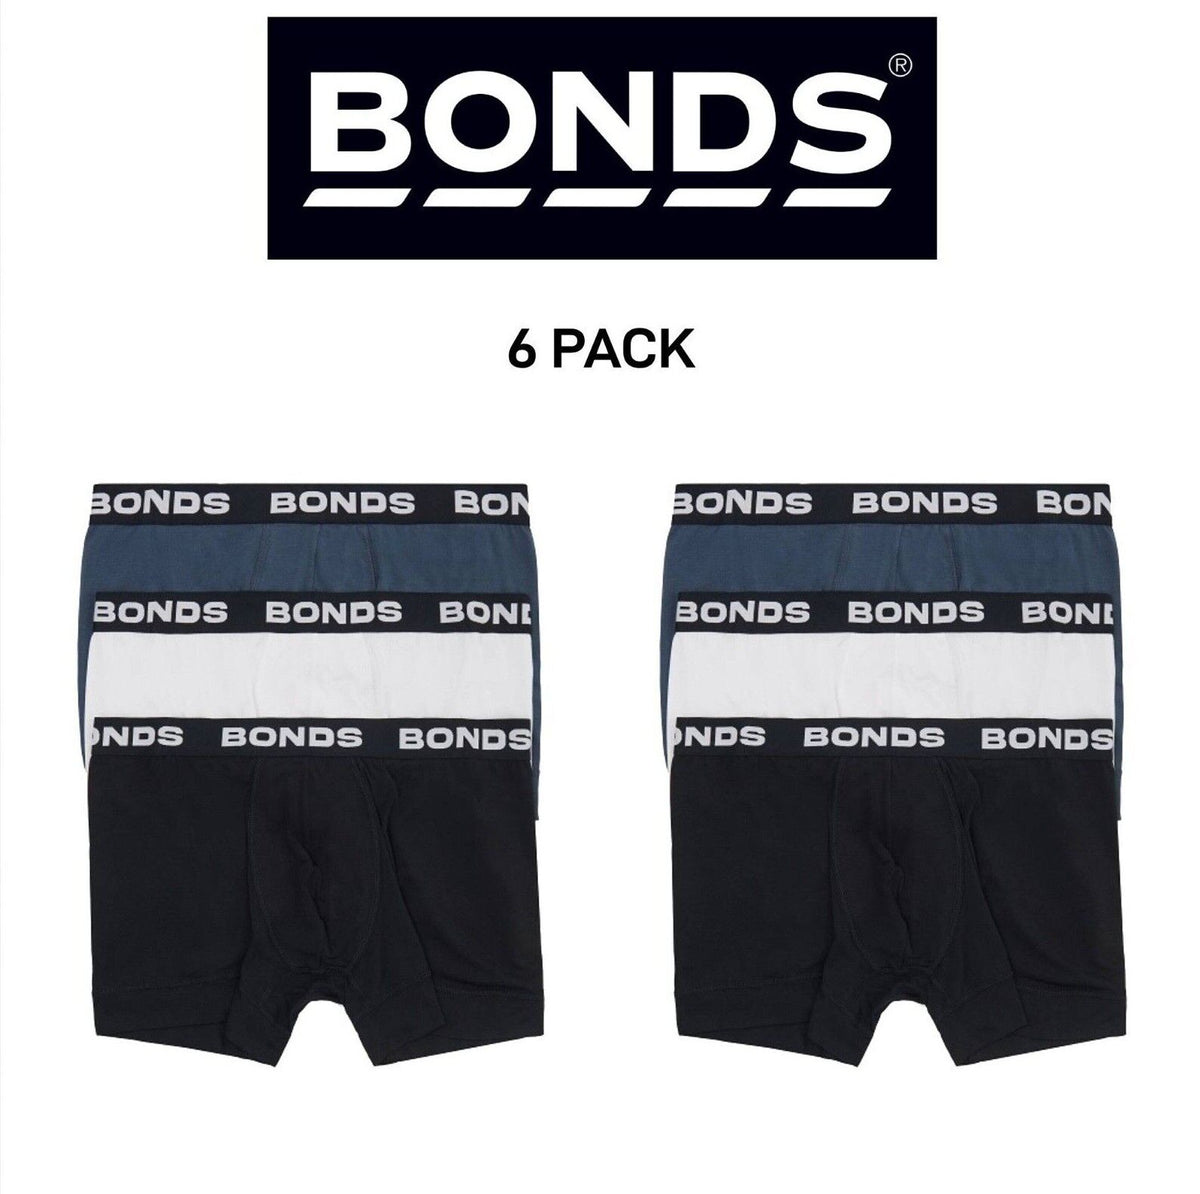 Bonds Mens Total Package Trunk Comfy Super Soft and Breathable 6 Pack MWK83A